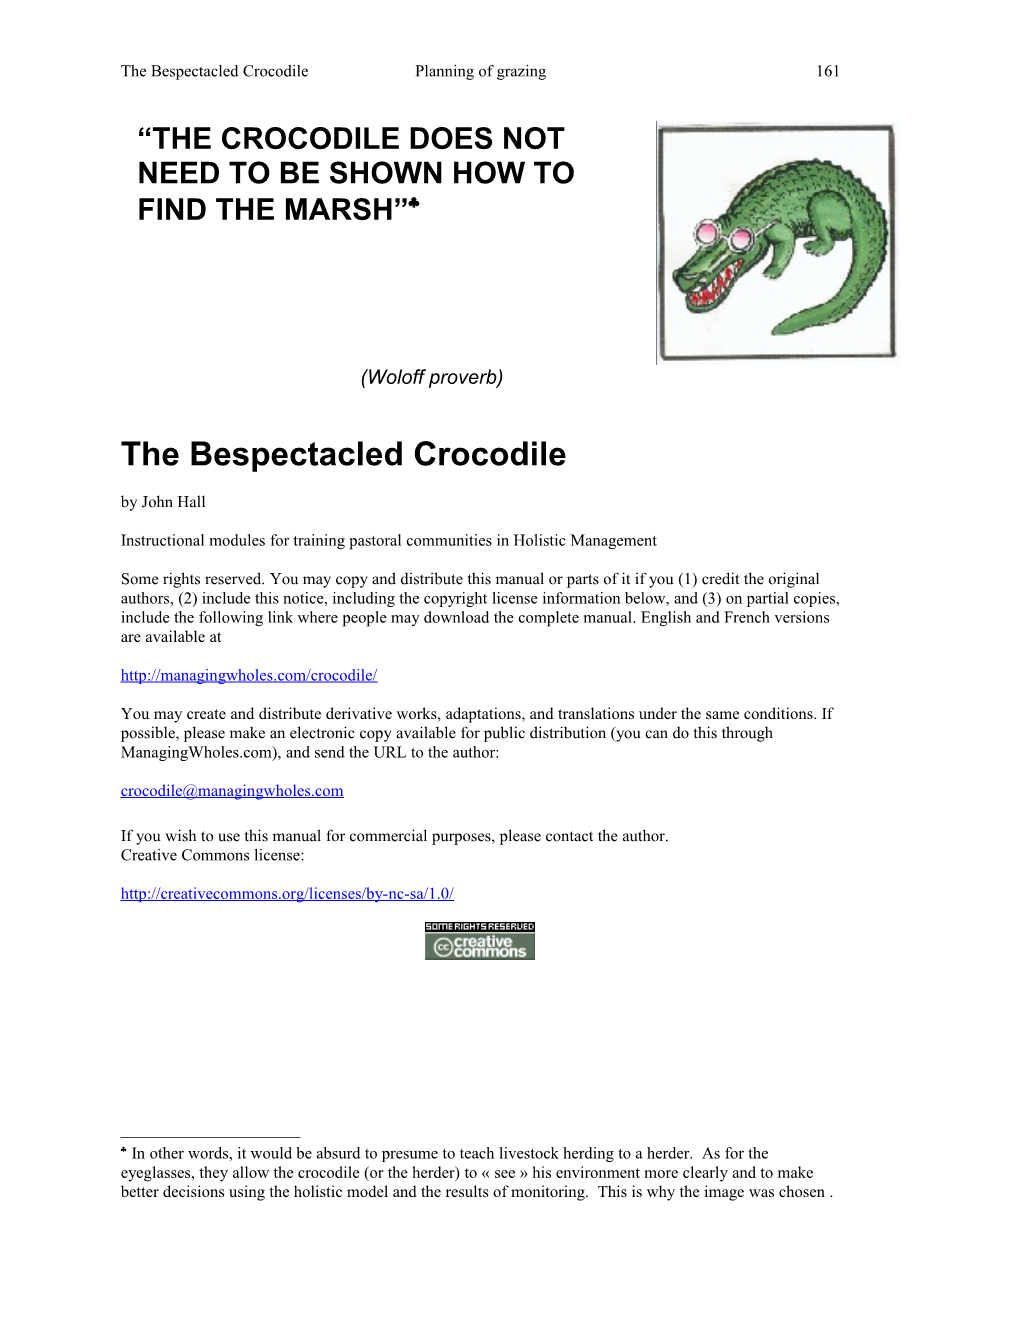 The Bespectacled Crocodileplanning of Grazing1